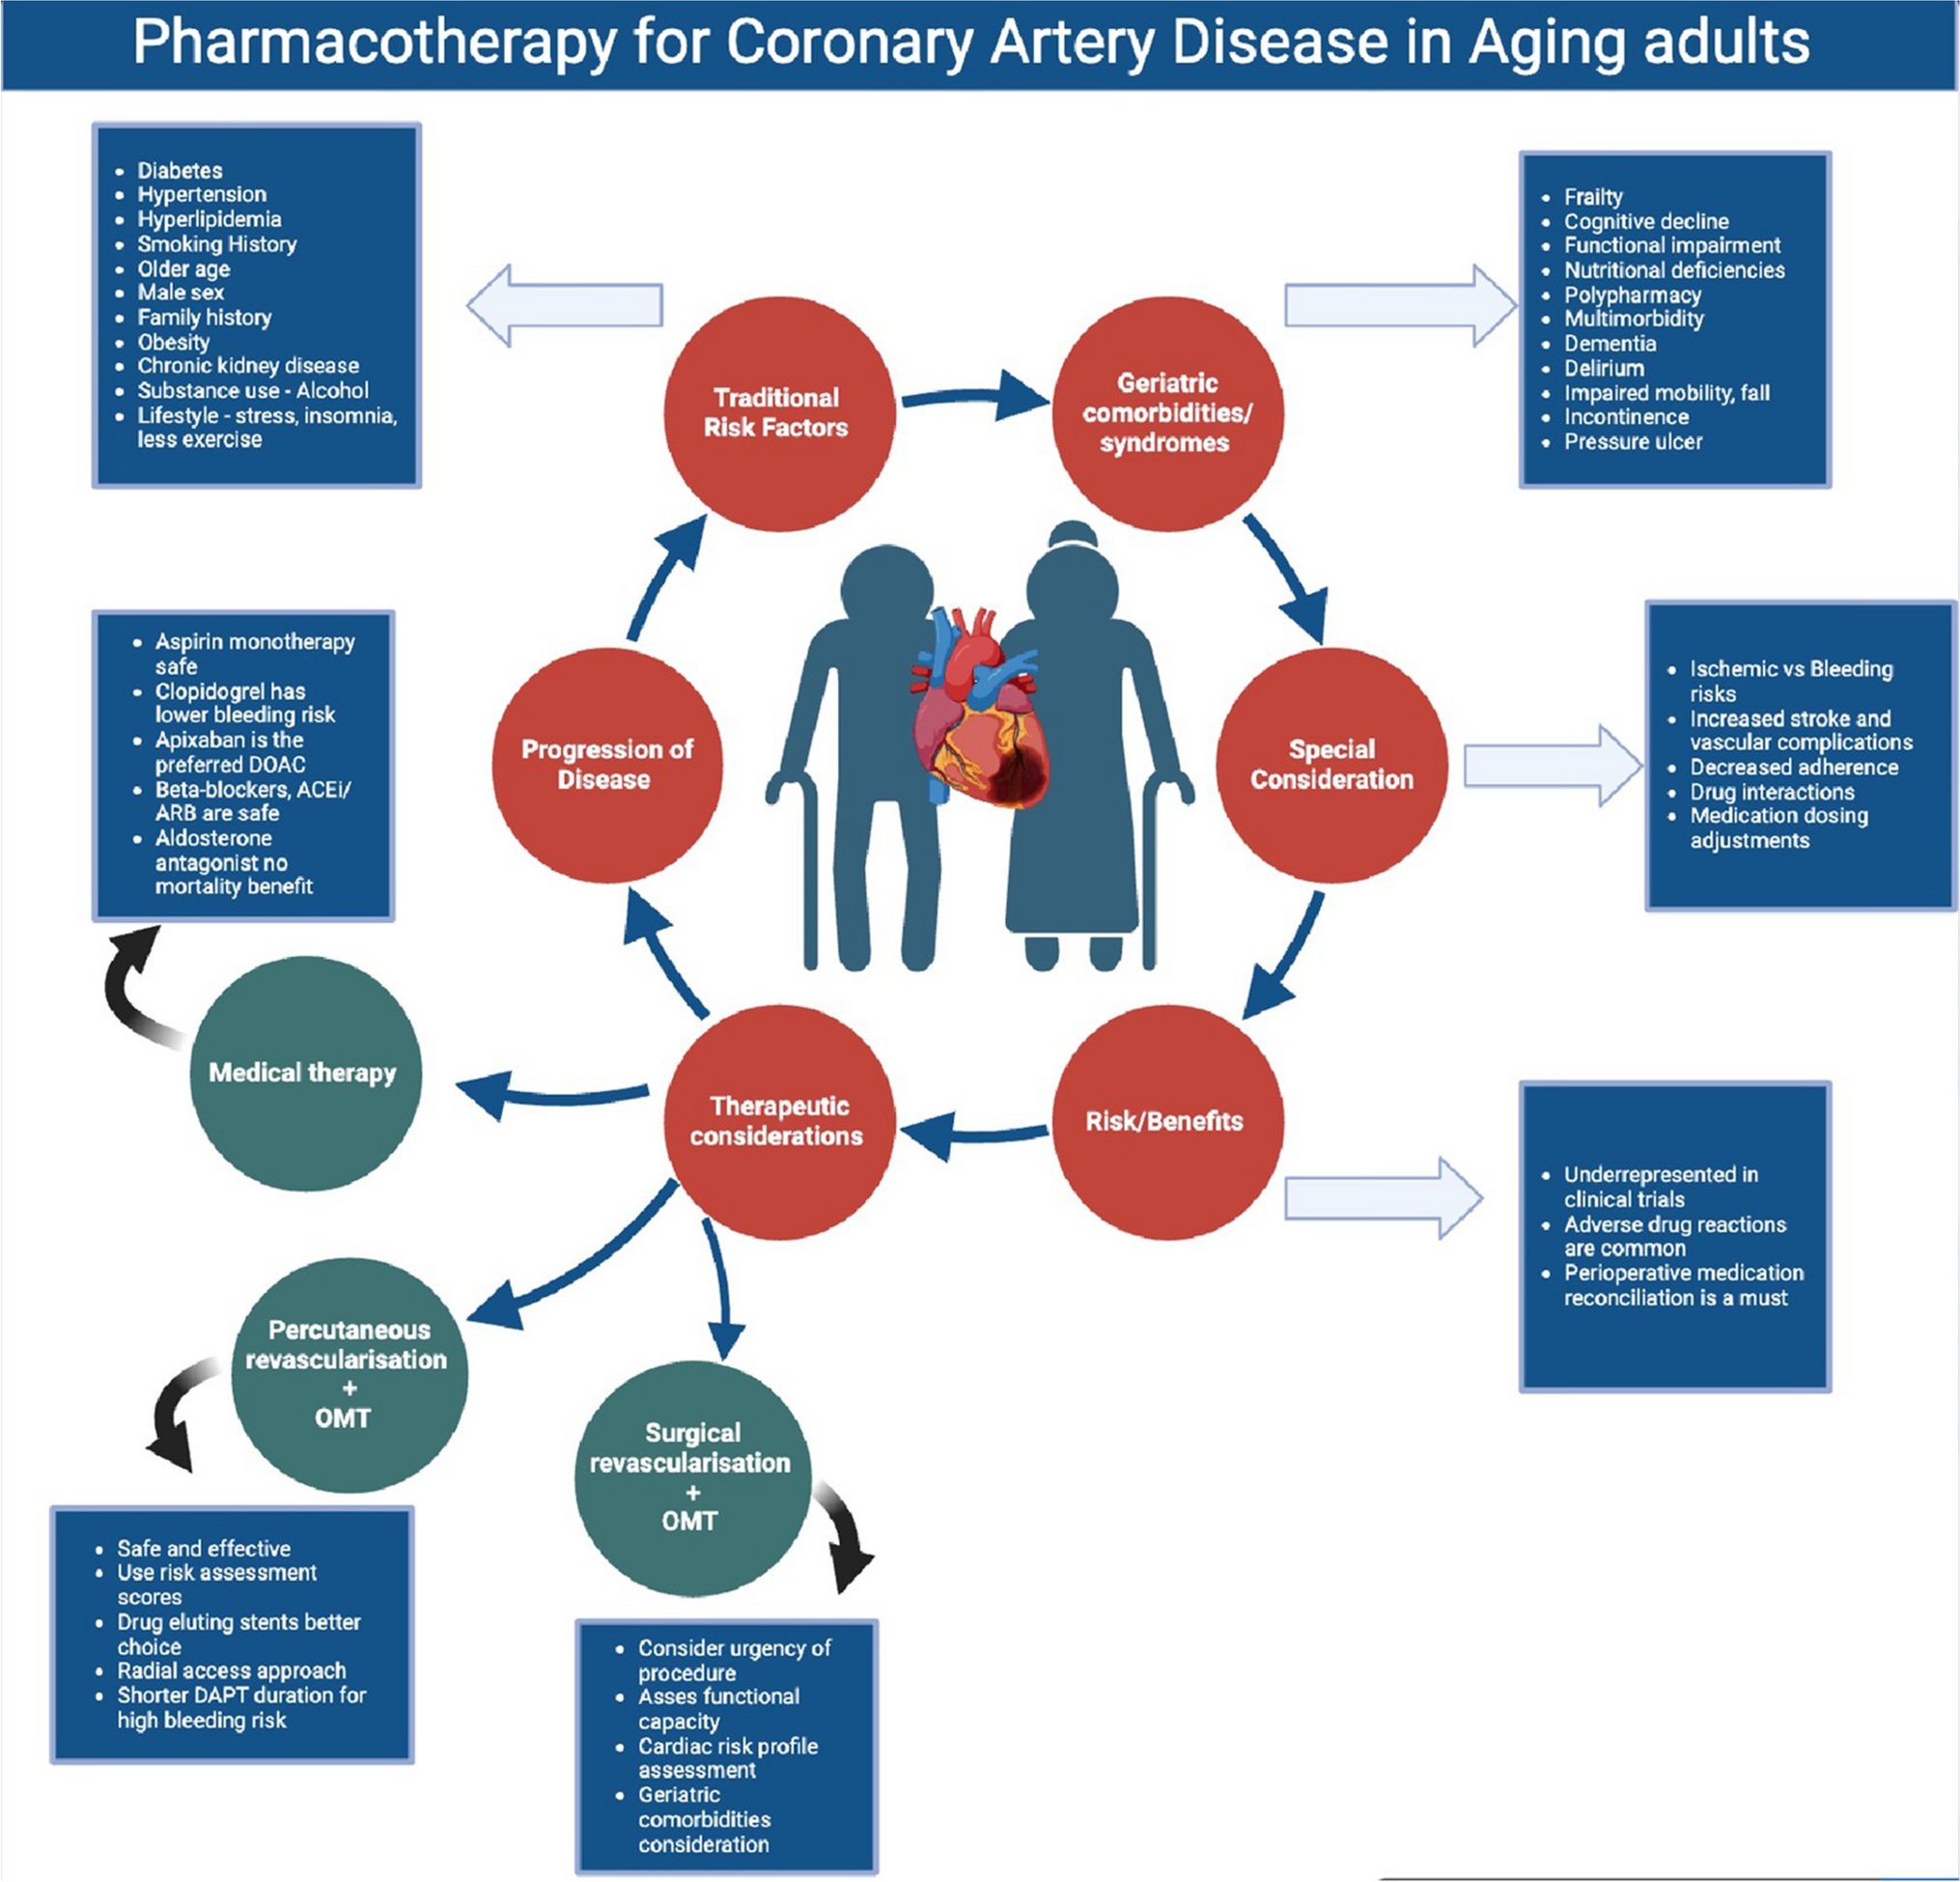 Pharmacotherapy for Coronary Artery Disease and Acute Coronary Syndrome in the Aging Population